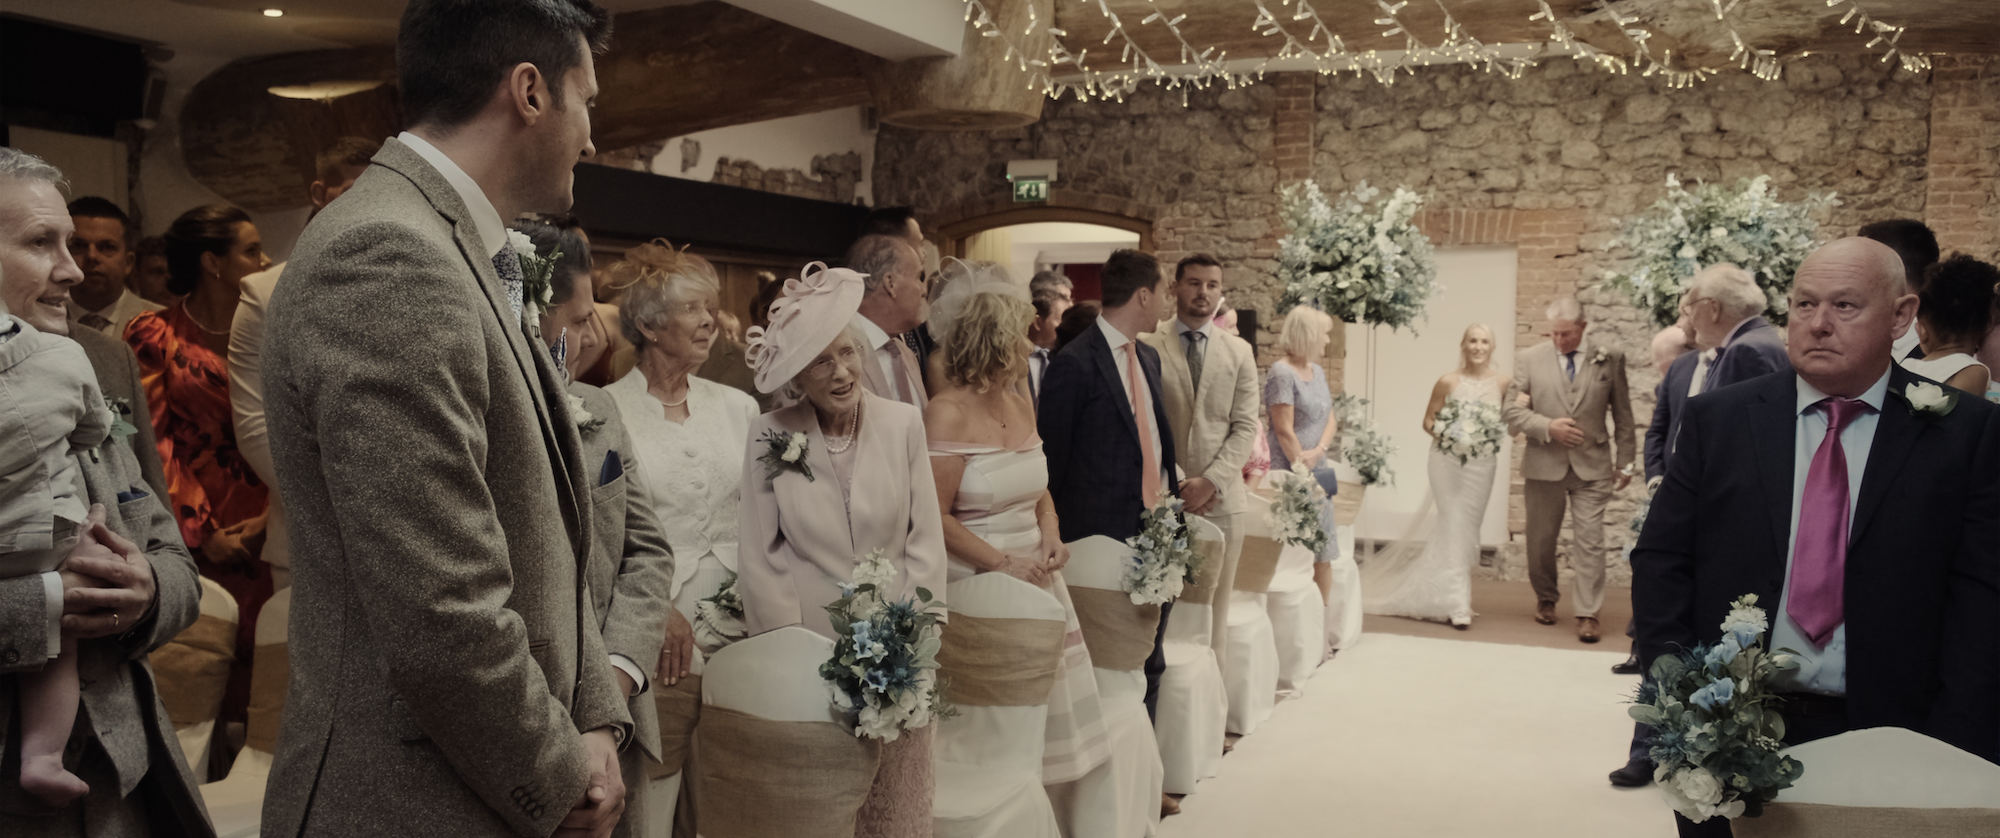 Oxwich Bay Hotel Wedding Videography by Ben Holbrook Films (Swansea South Wales).jpeg48.png